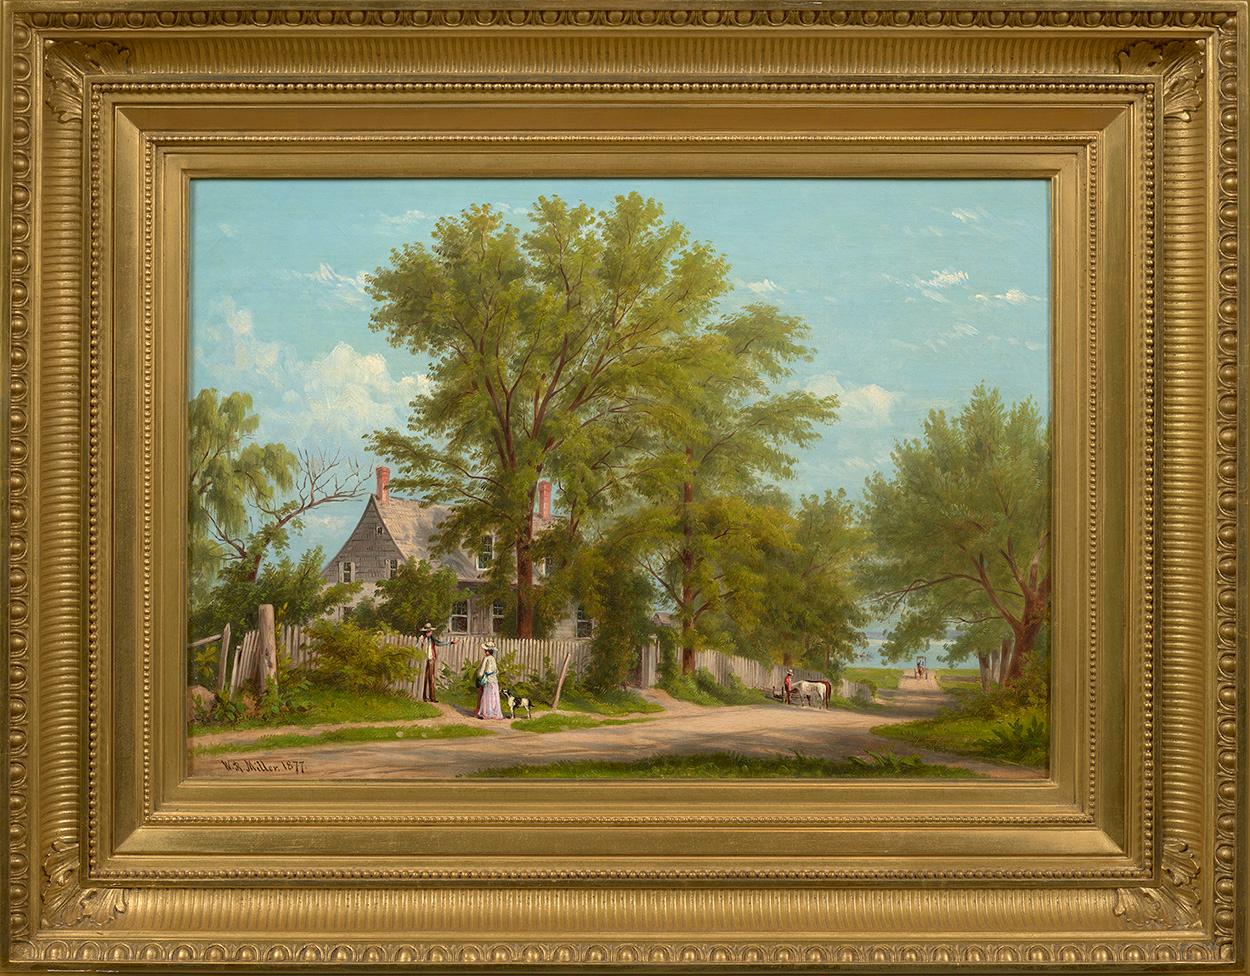 The Rapelye Homestead, Bowery Bay, Long Island - Painting by William Rickarby Miller